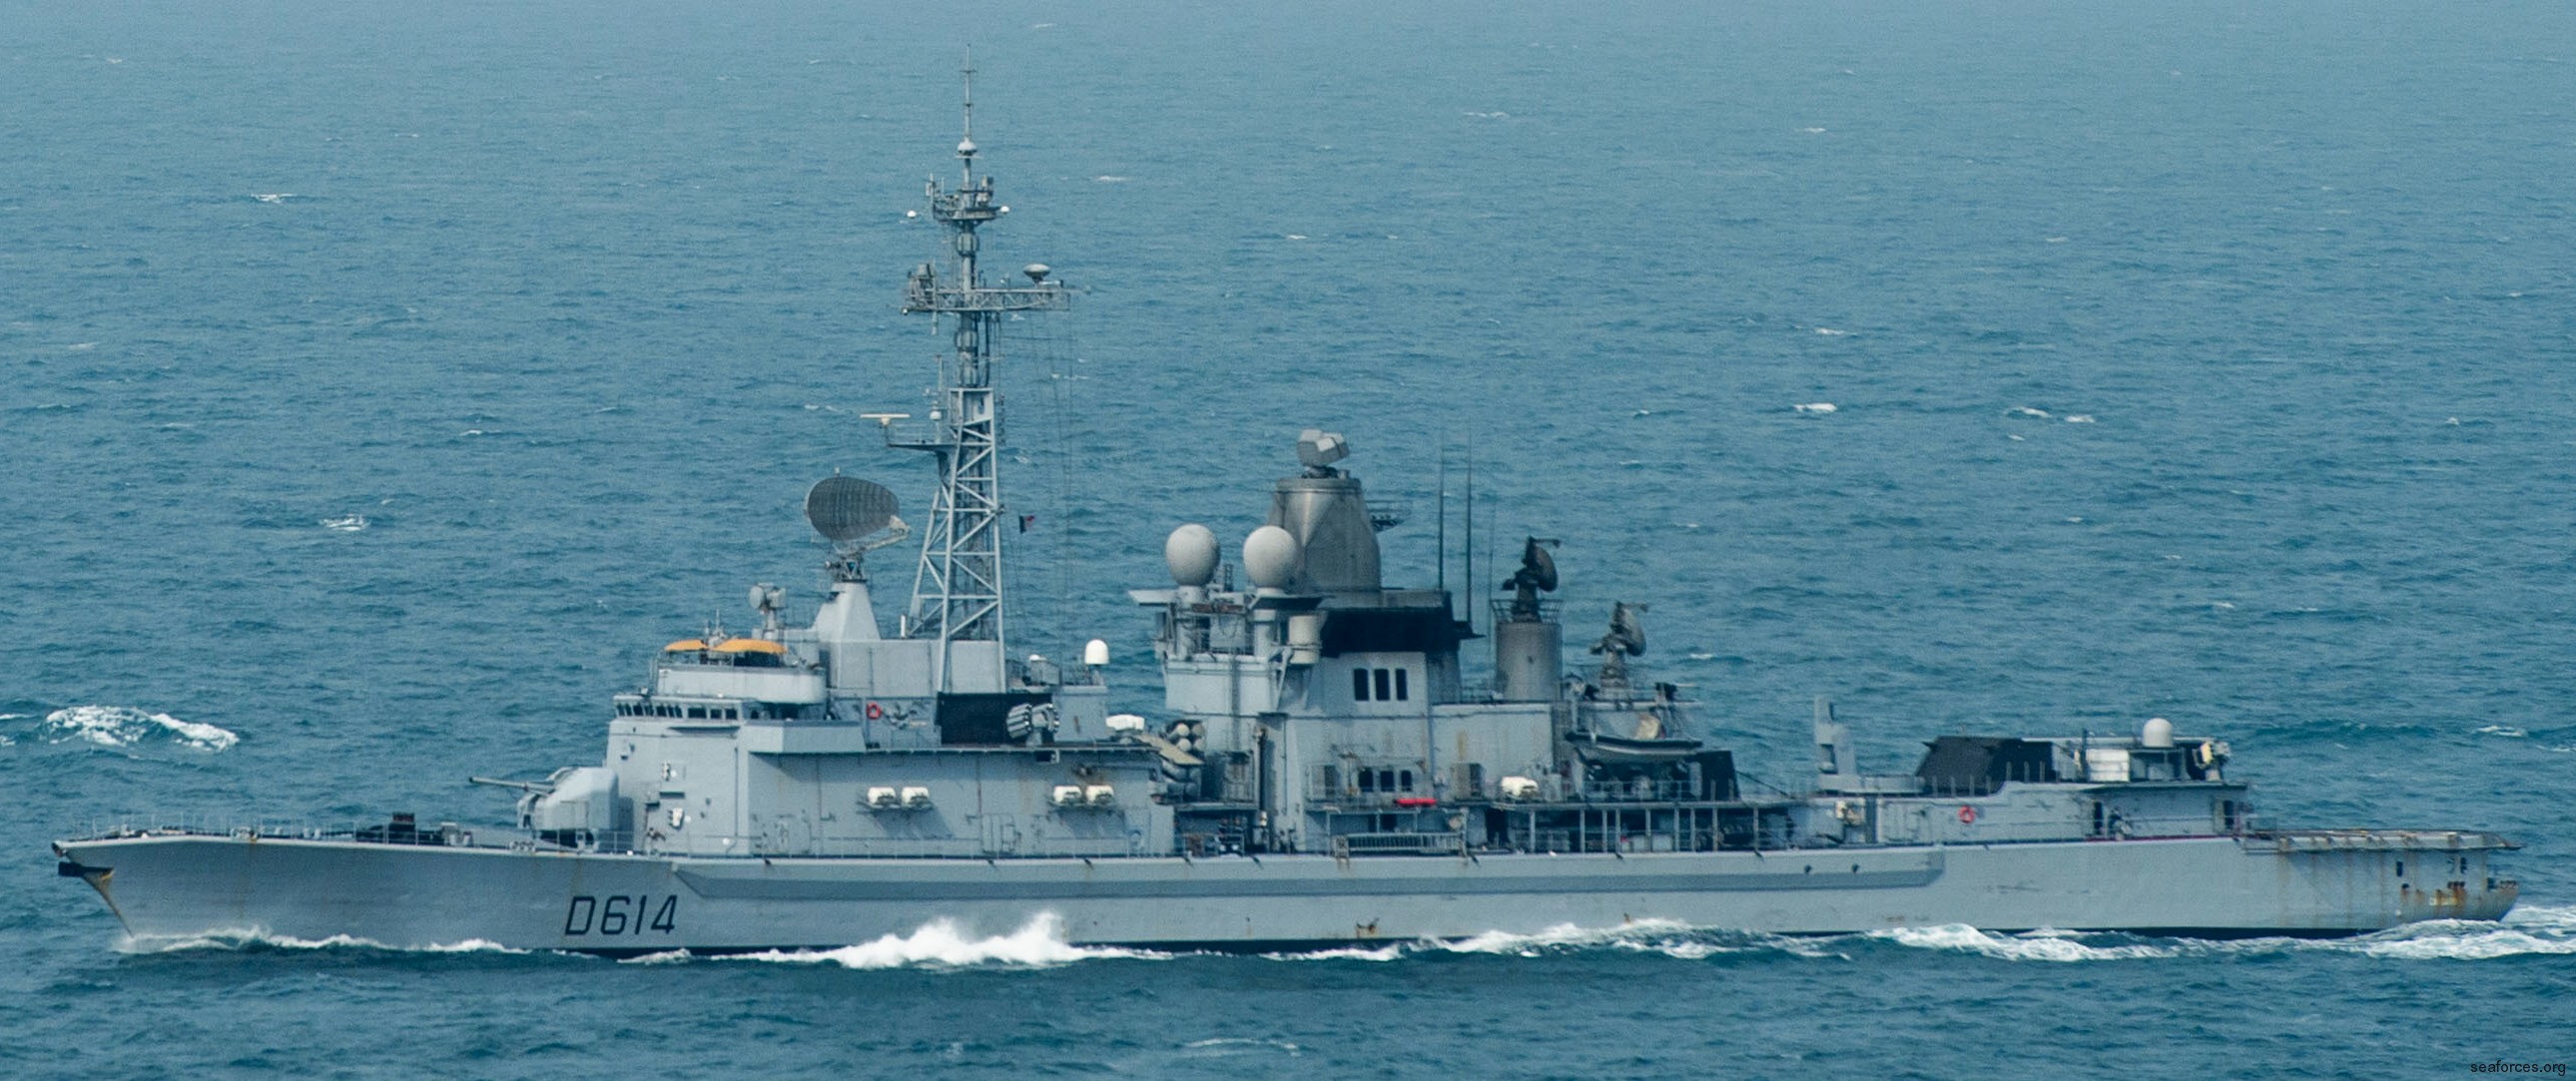 d-614 fs cassard f70aa class guided missile frigate ffgh ddg french navy marine nationale 15